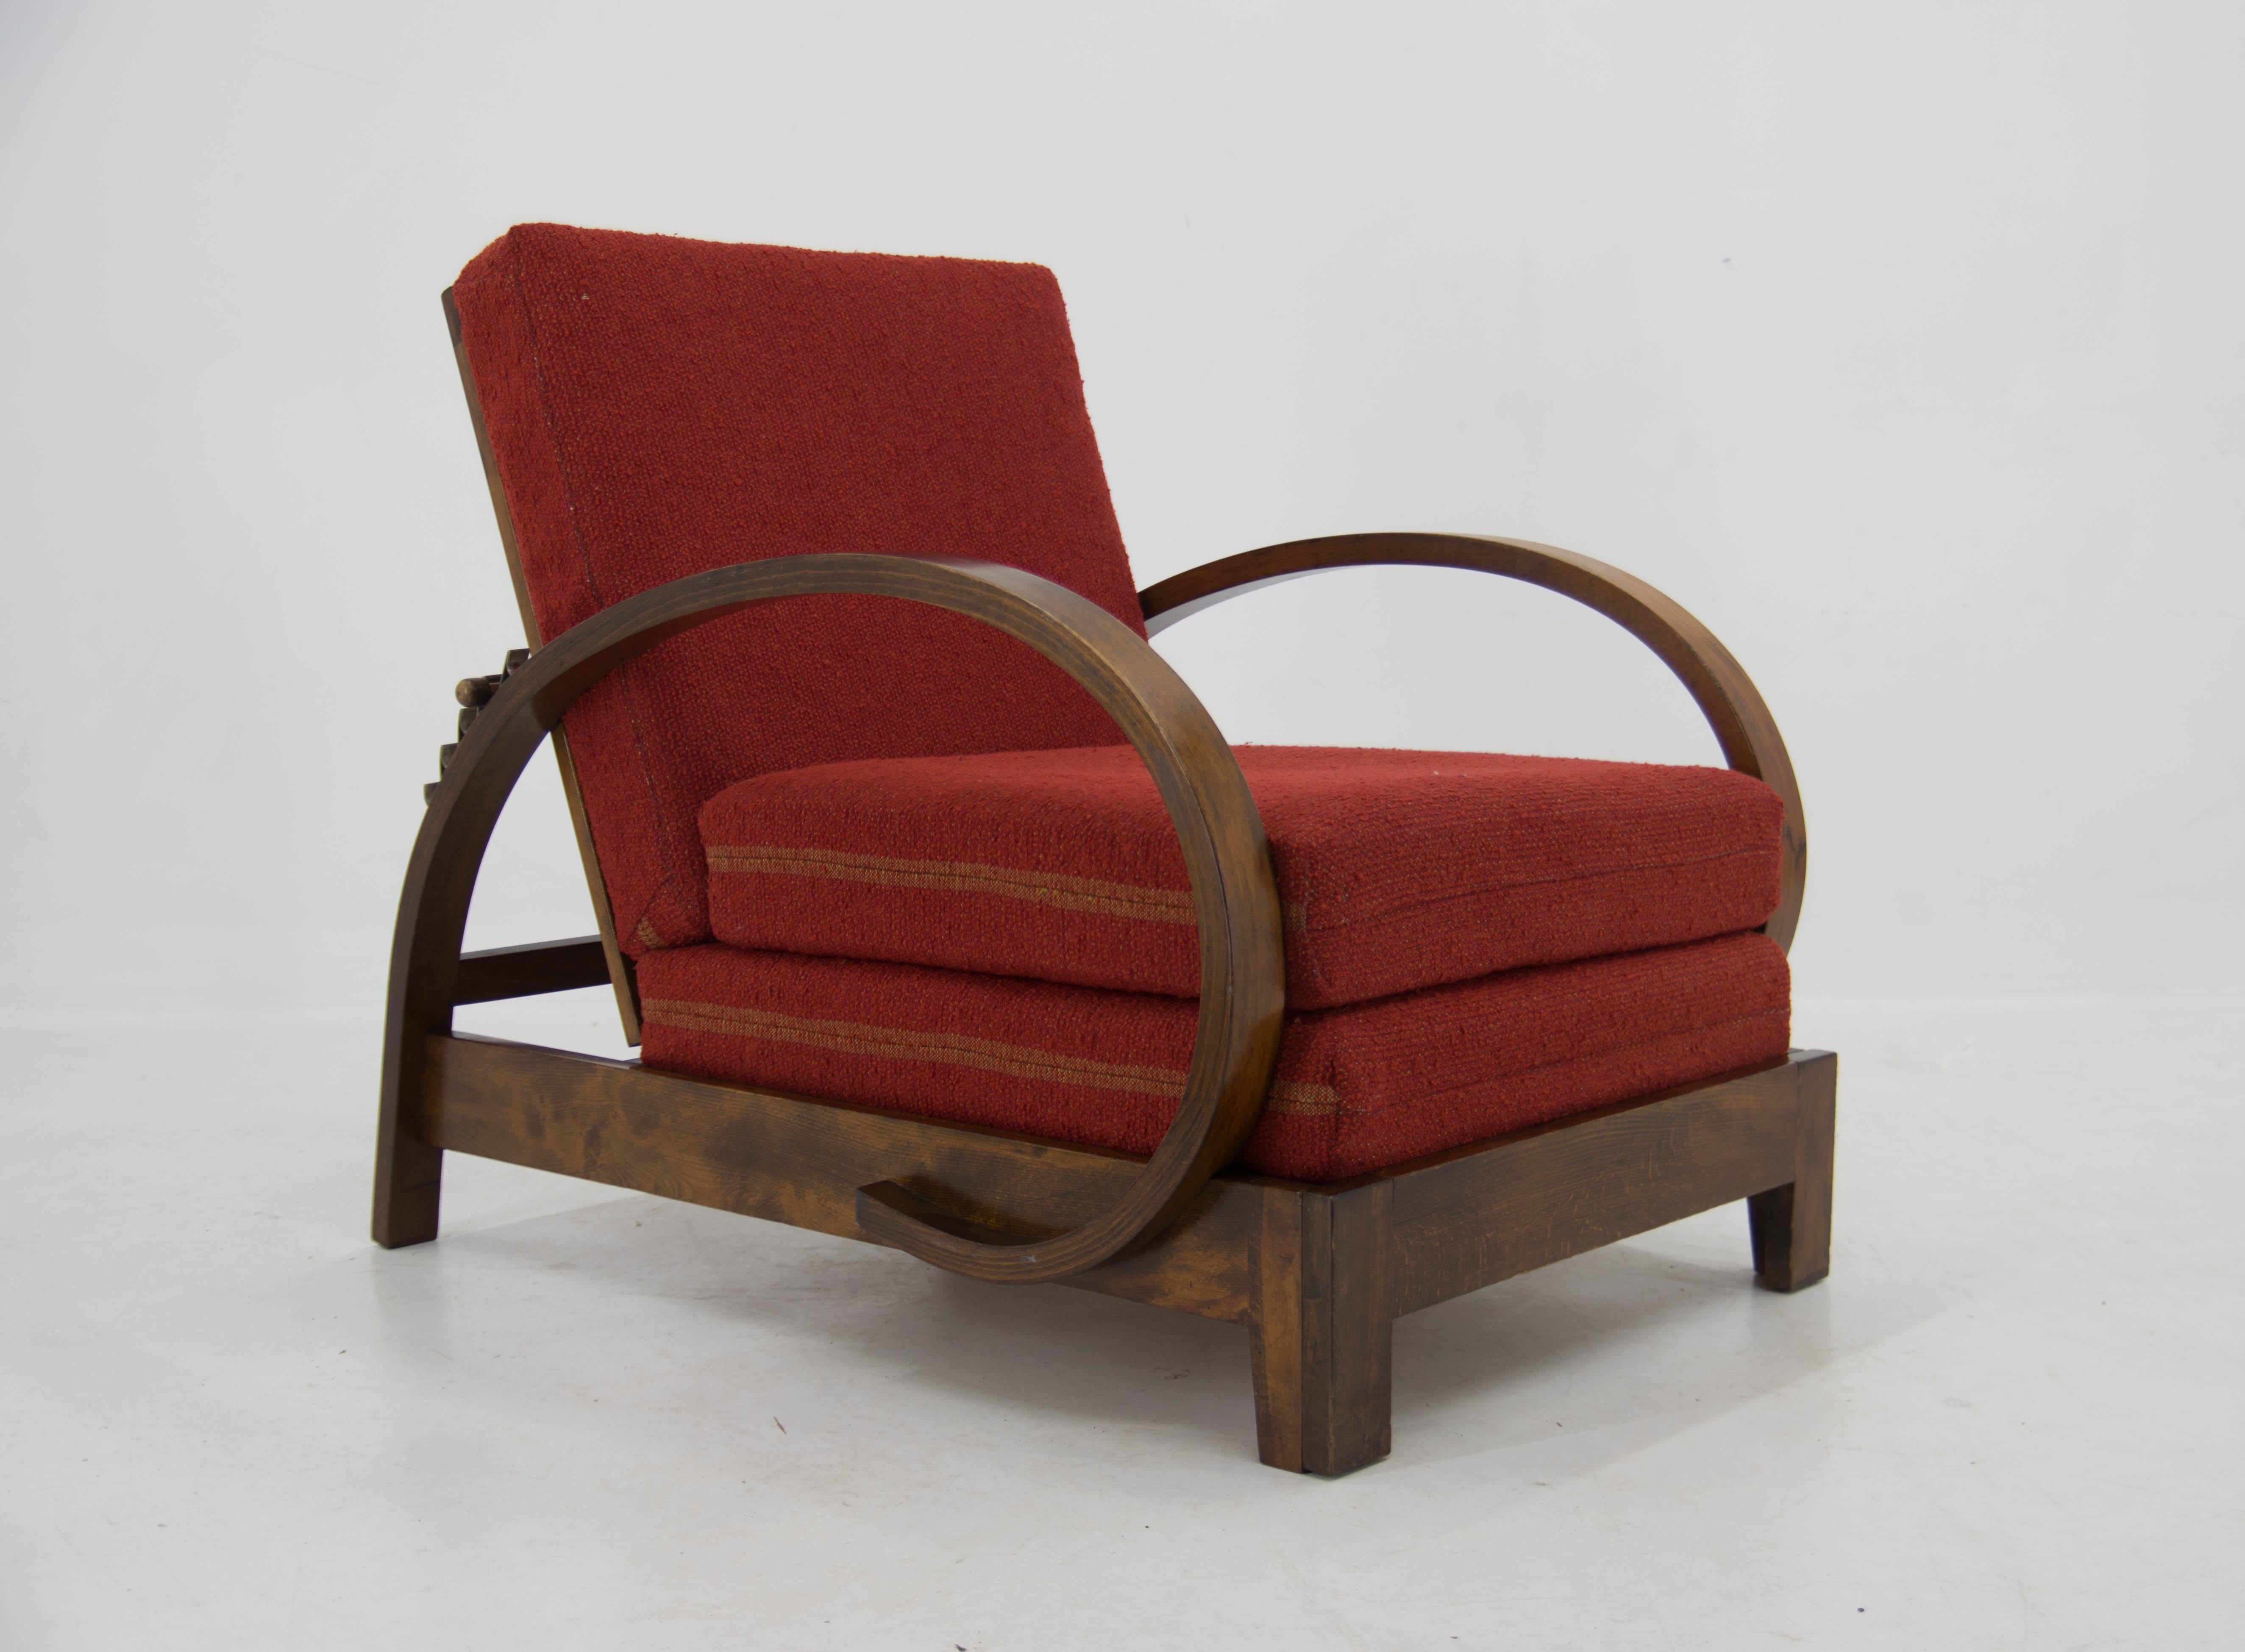 Adjustable armchair can be converted to daybed.
Exceptionally well preserved condition.
Cushions in very good condition - still very comfortable, a few minor damages probably by moths.
Wooden frame in super condition - very few scratches
Shipping